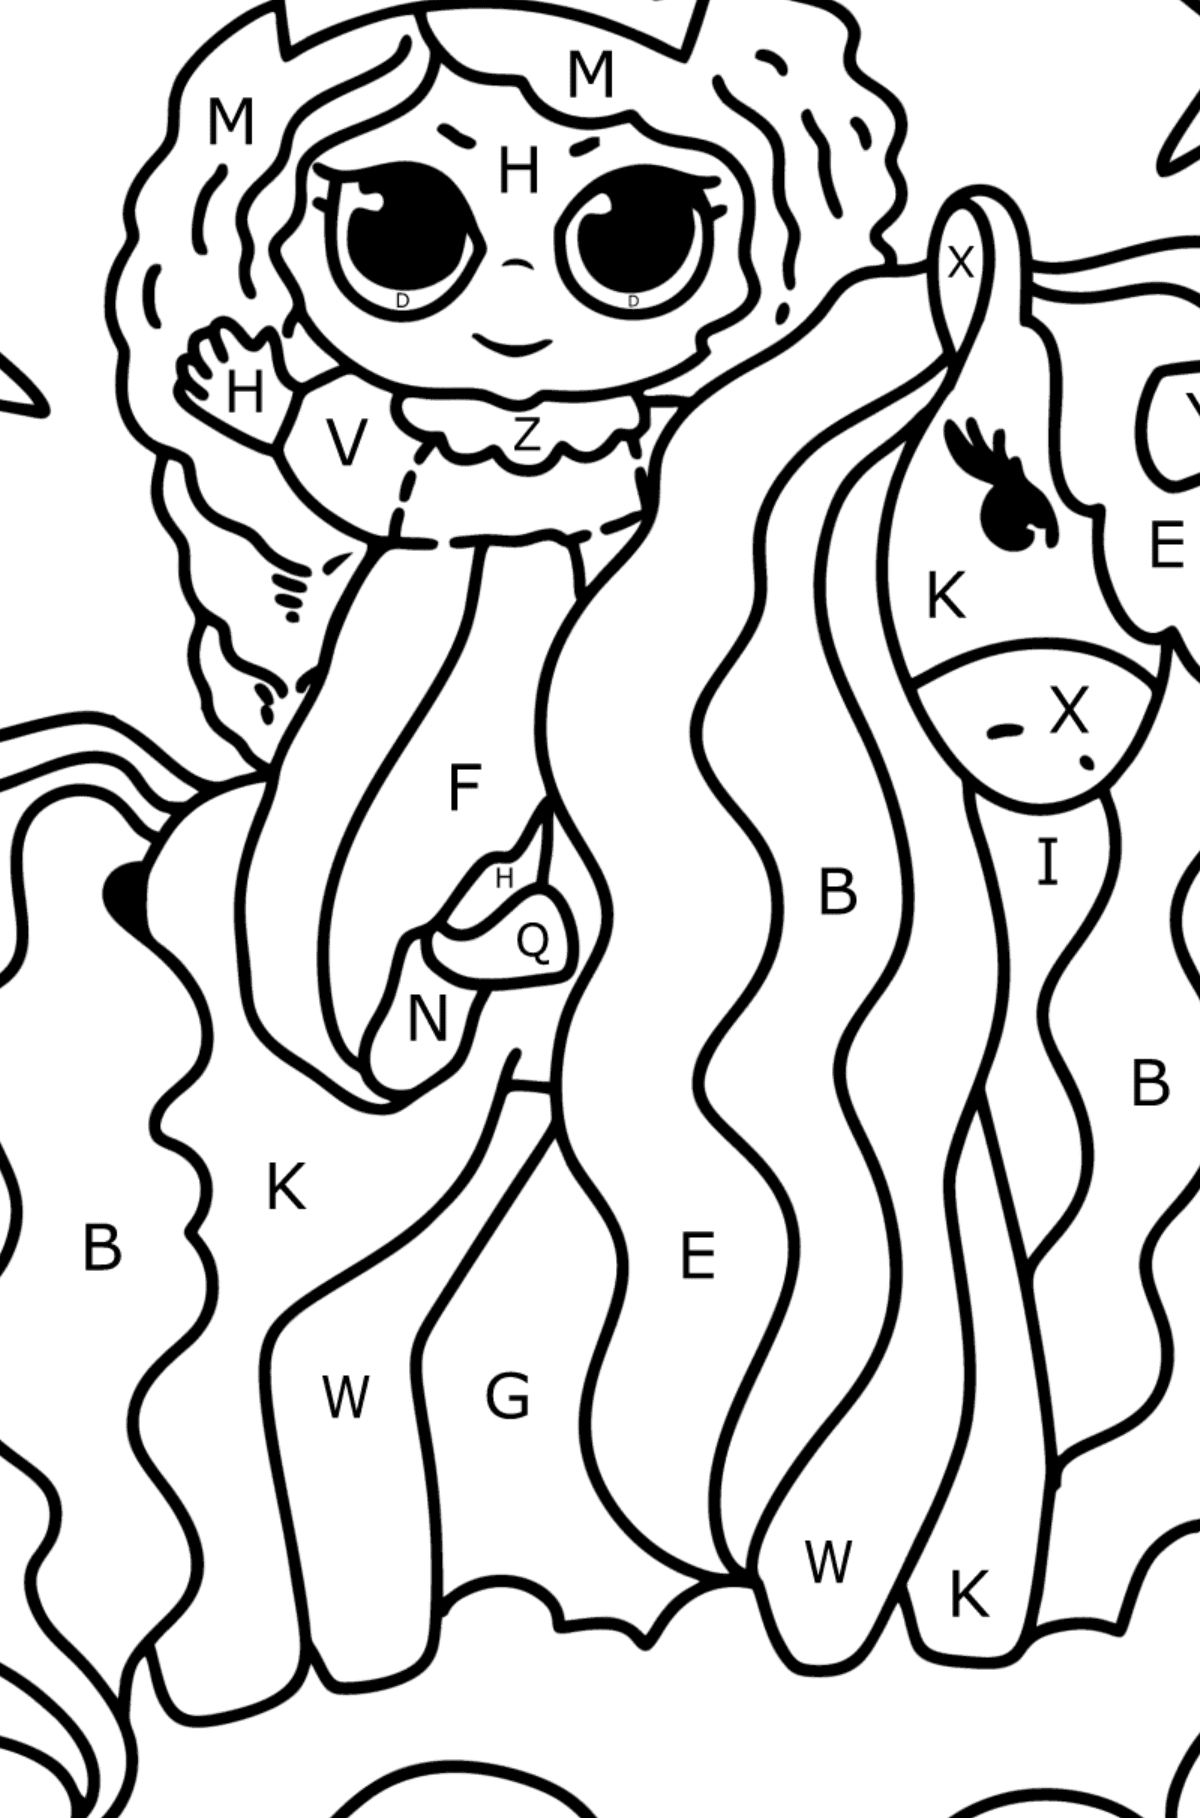 Princess and unicorn coloring page - Coloring by Letters for Kids